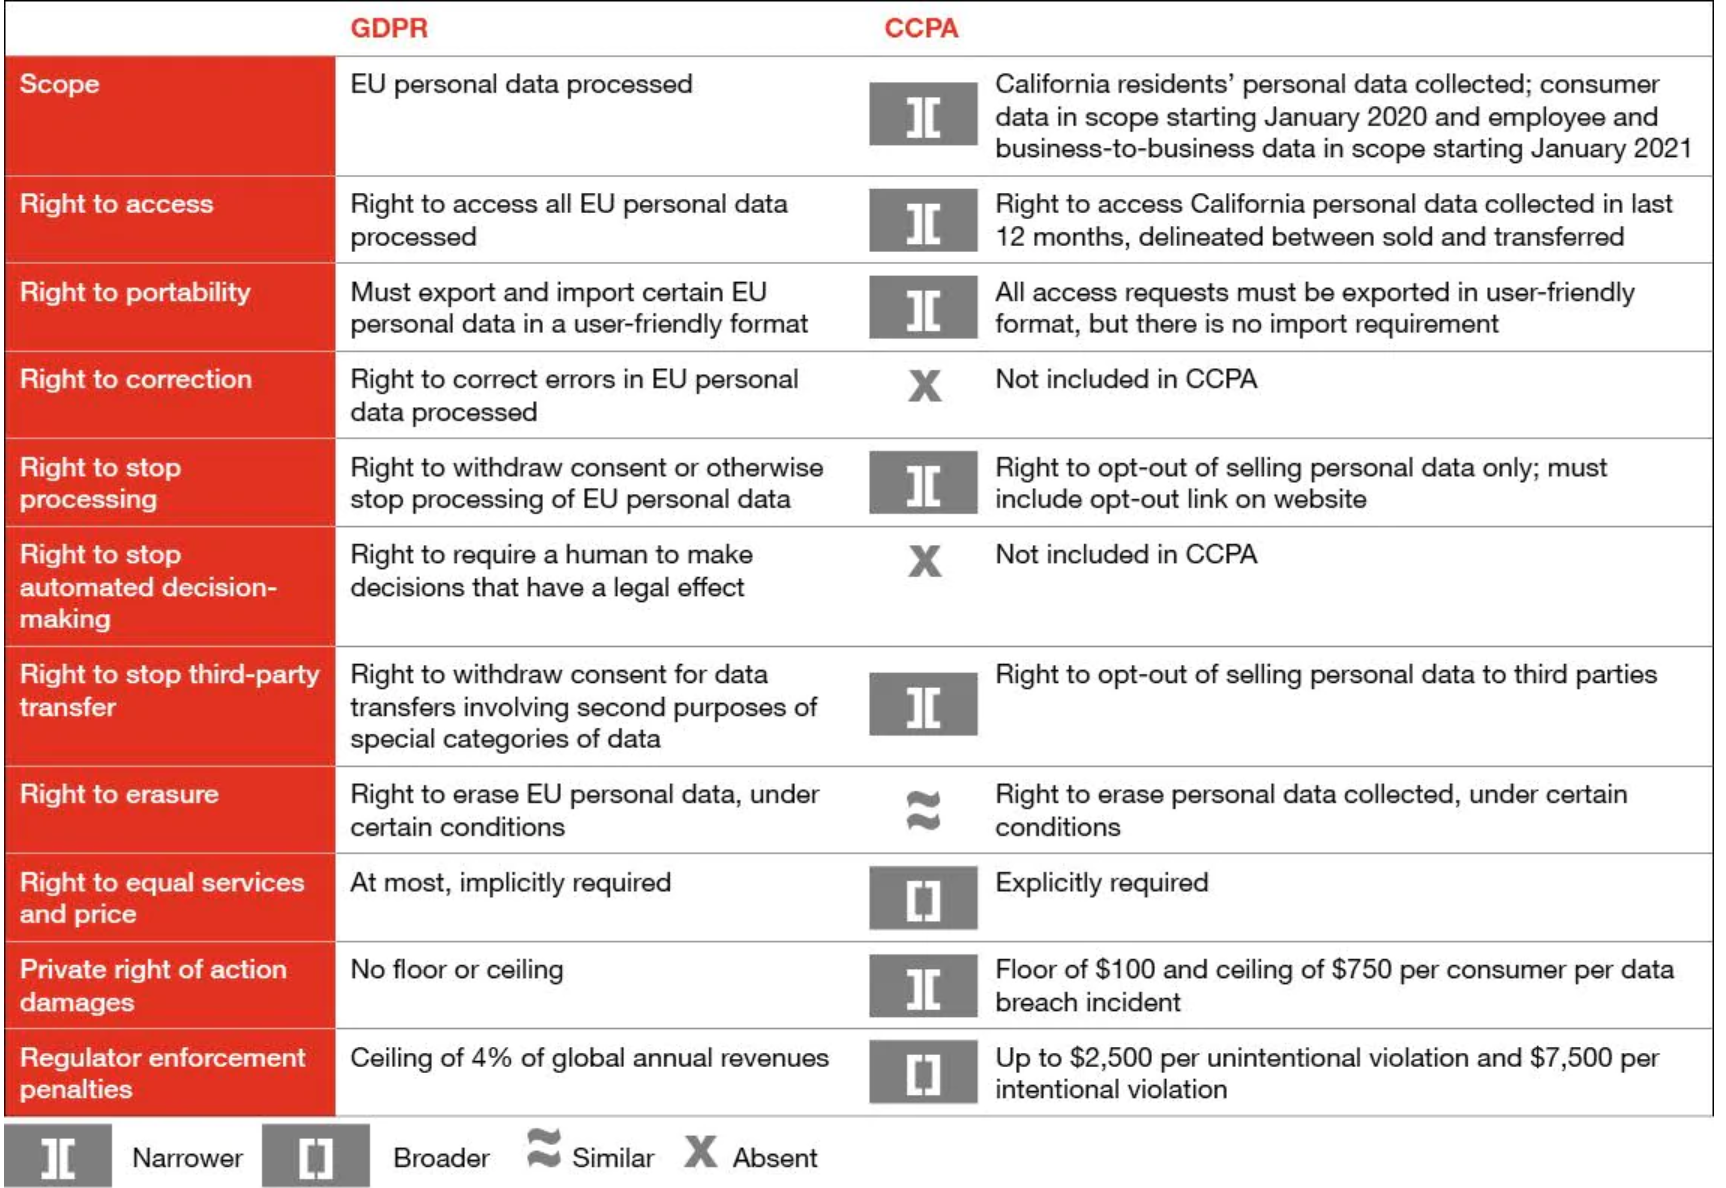 large table comparing GDPR and CCPA